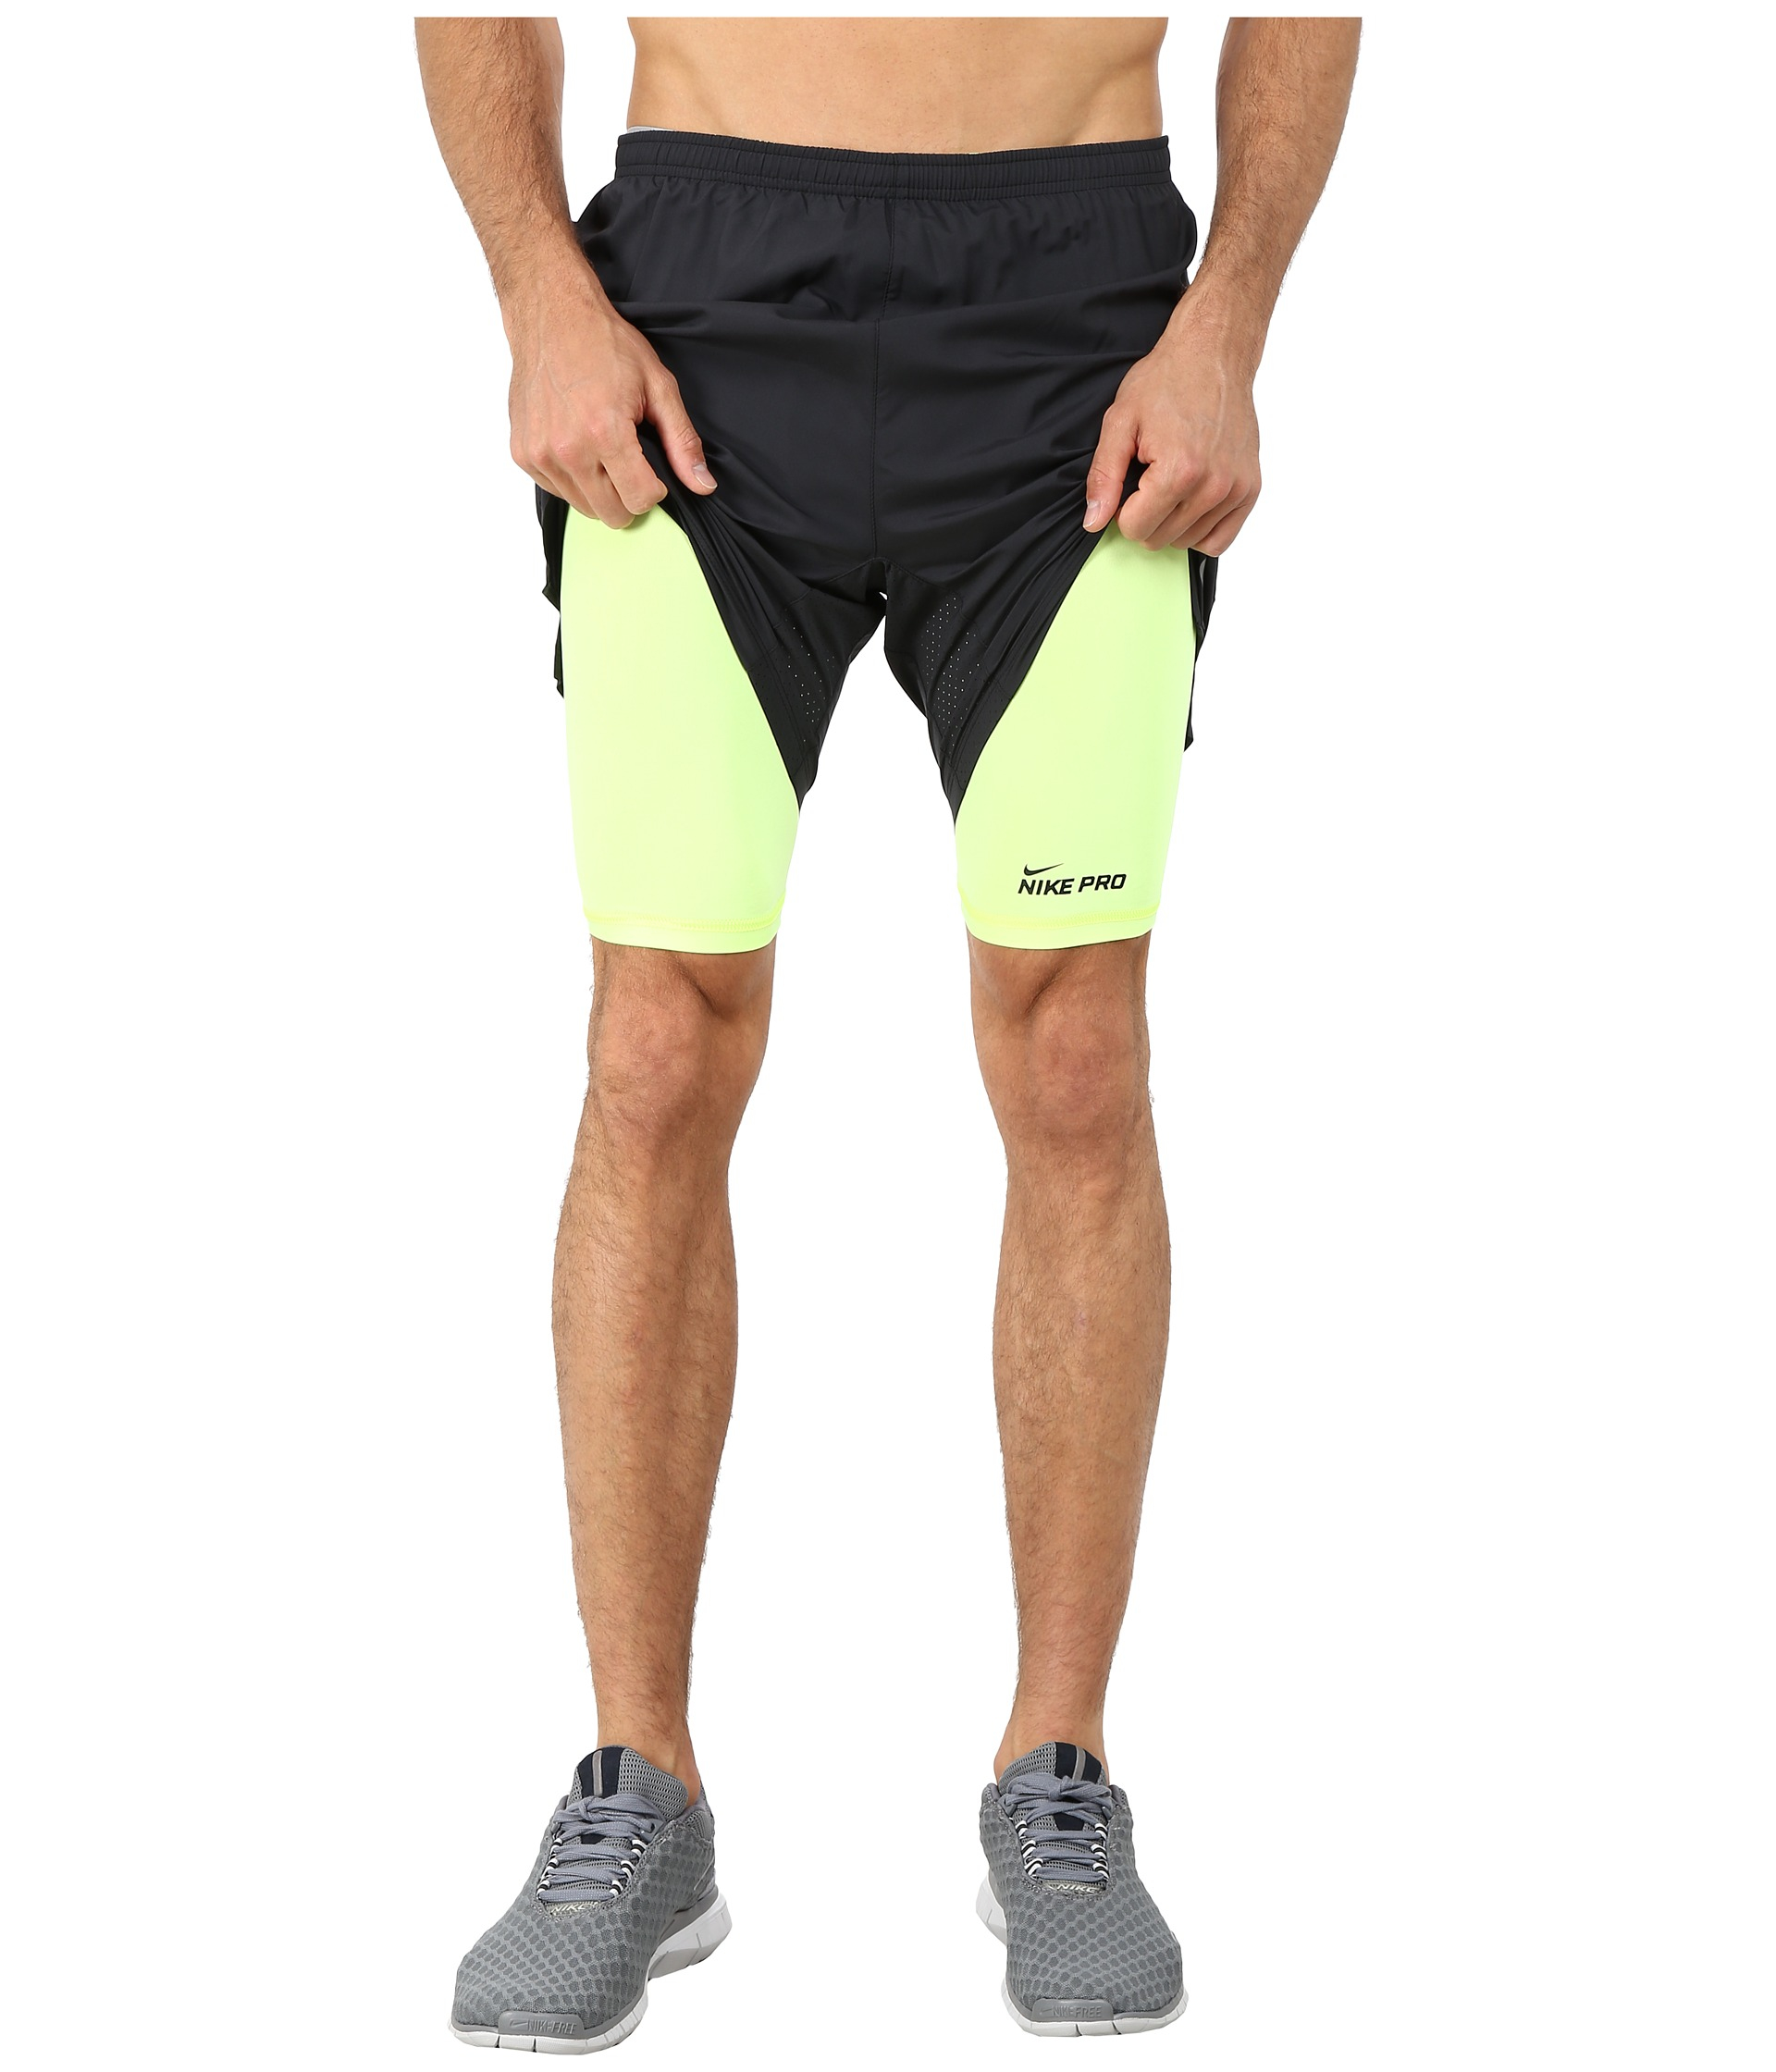 nike running 7 pursuit 2-in-1 shorts in black, Off 67%, www.spotsclick.com